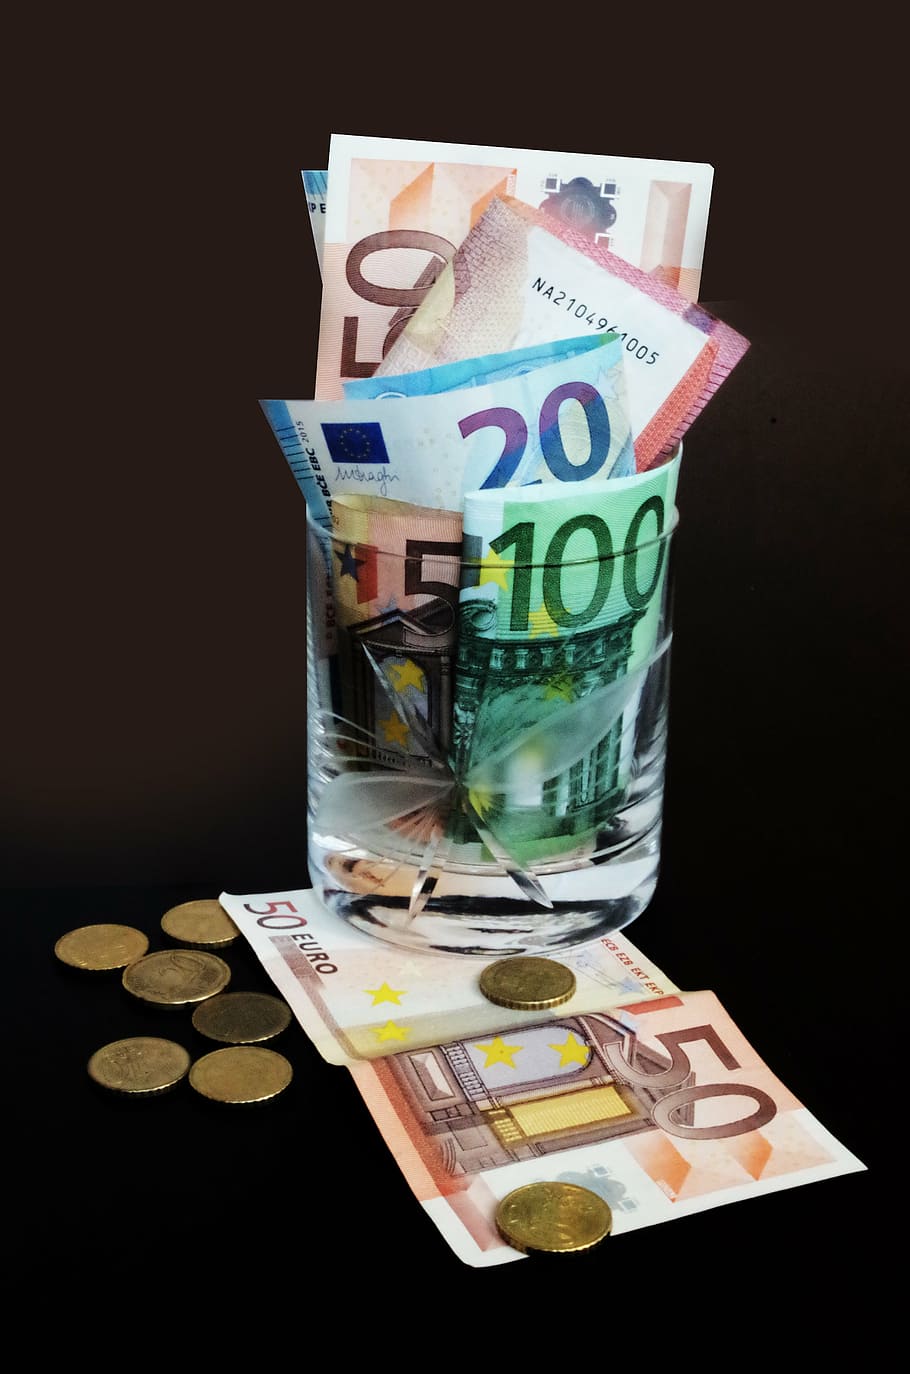 investment, investor, money, euros, currency, paper Currency, finance, wealth, european Union Currency, business